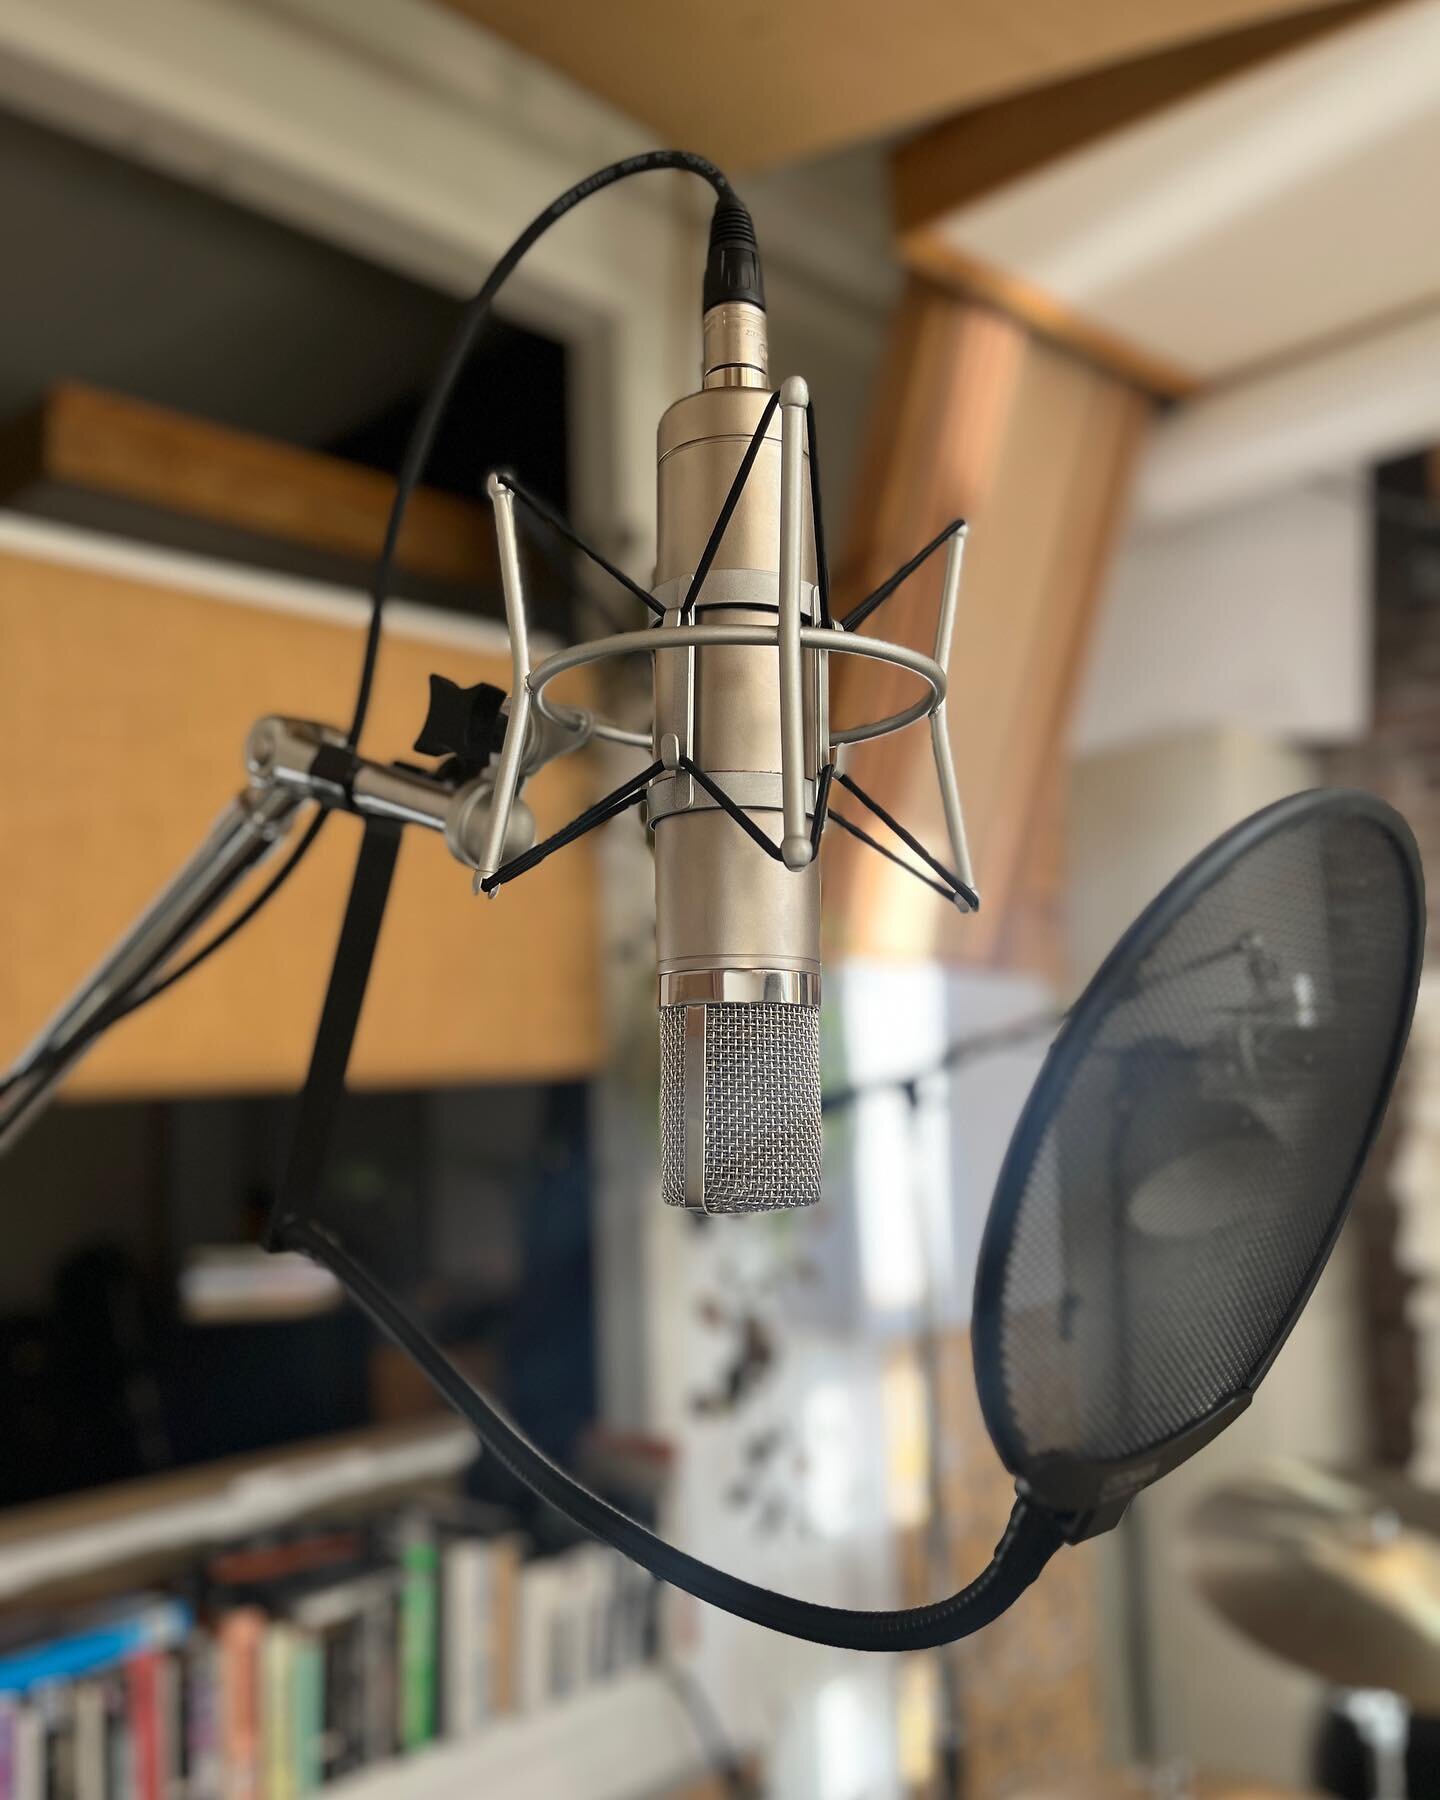 Between sessions I&rsquo;ve been focusing on building microphones. Besides being super fun, I&rsquo;ve learned so much about why a microphone sounds the way it does due to capsule design and circuity. Good microphones make better records. #microphone